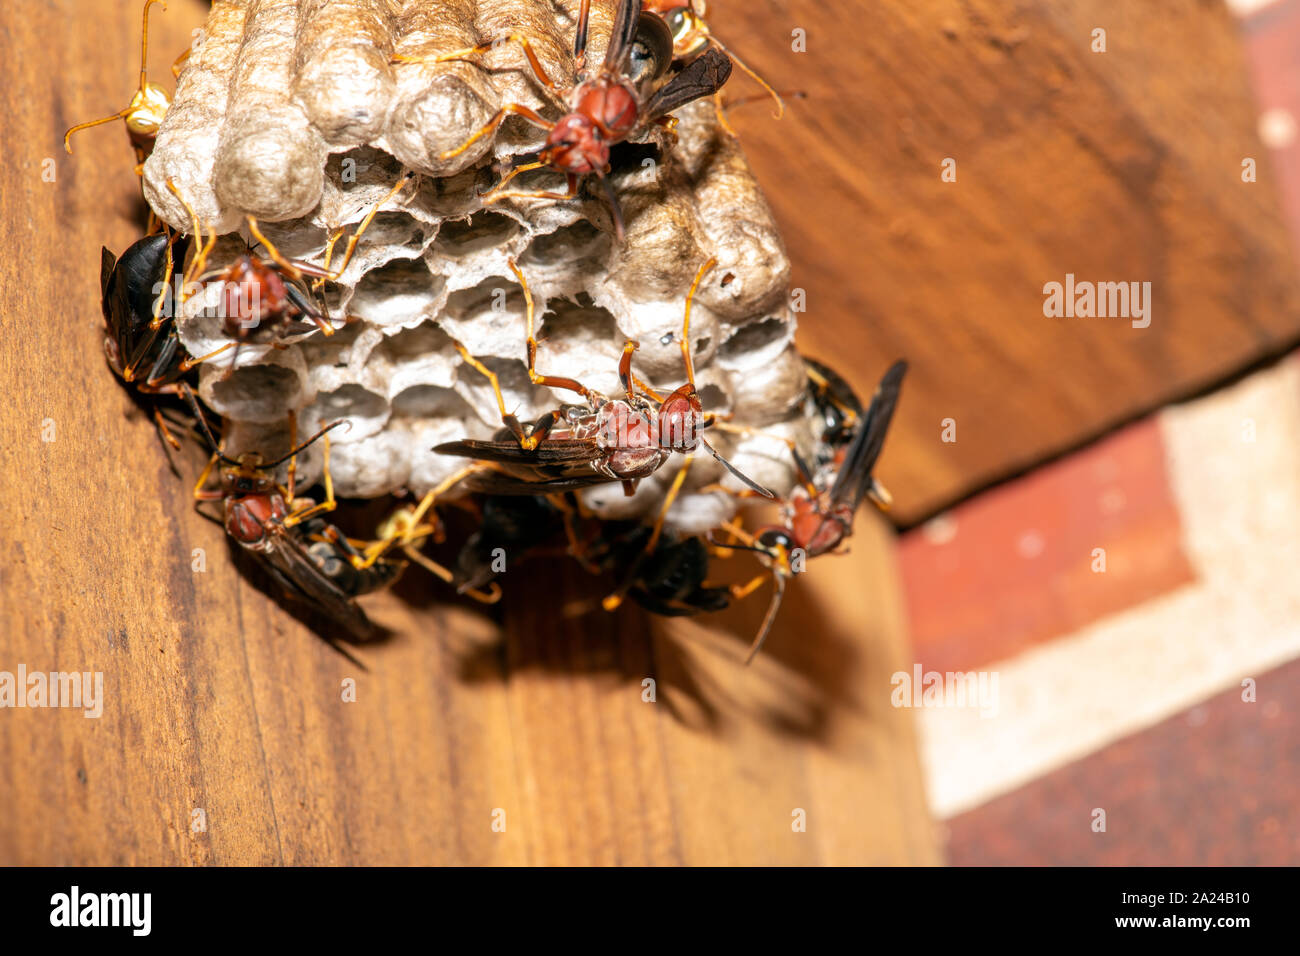 red paper wasps, Polistes carolina, on a large nest suspended from a fence Stock Photo